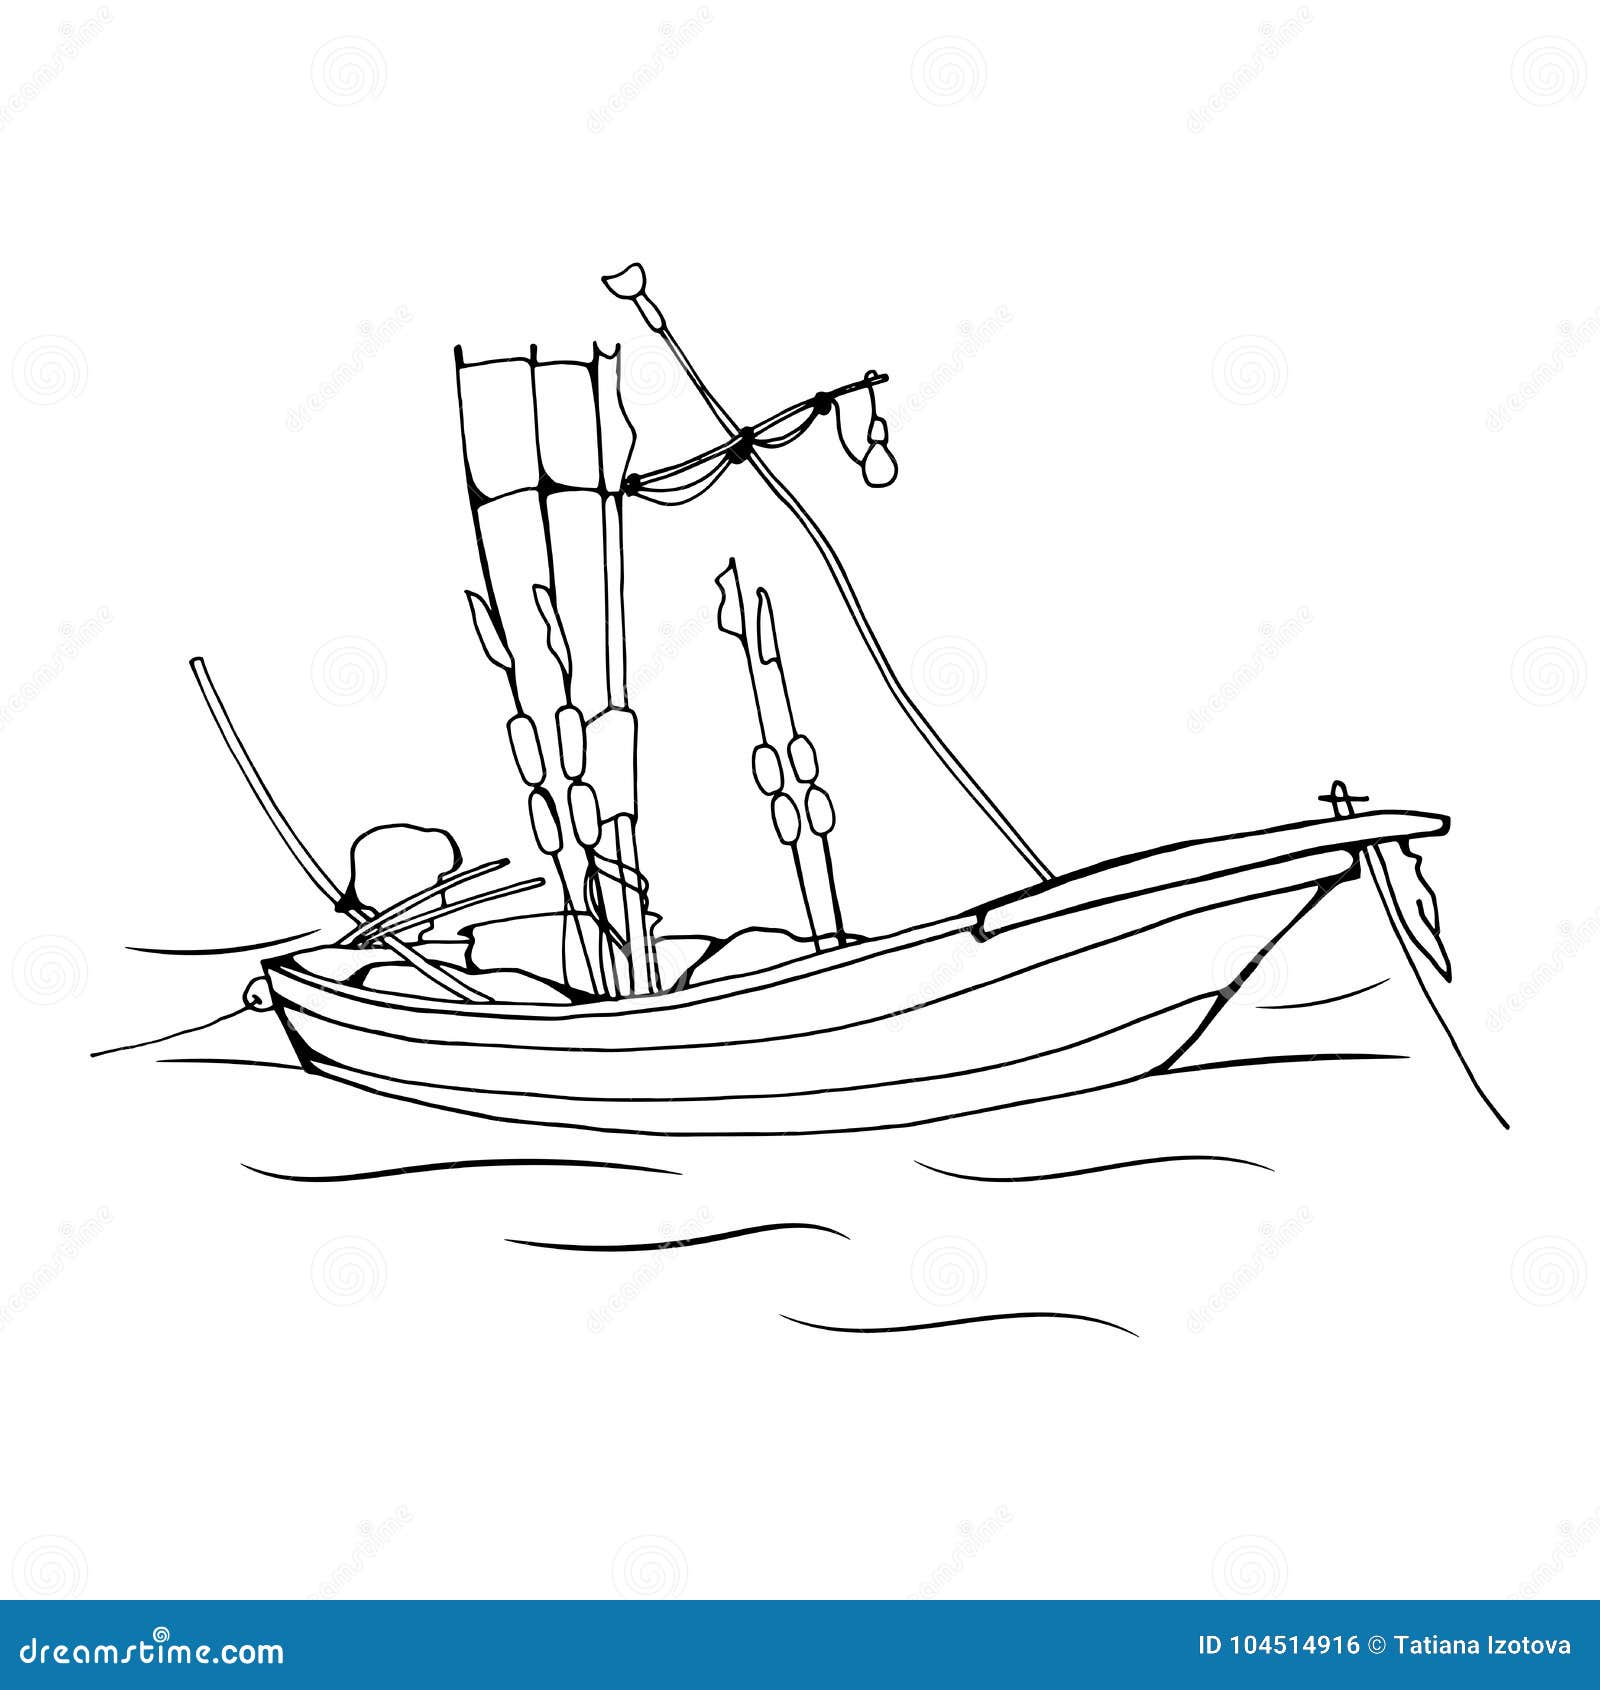 $100 Row boat sketch. Original art, pencil drawing by Elena Whitman. Love  rippled reflection on the water. | Landscape drawings, Boat drawing, Boat  sketch